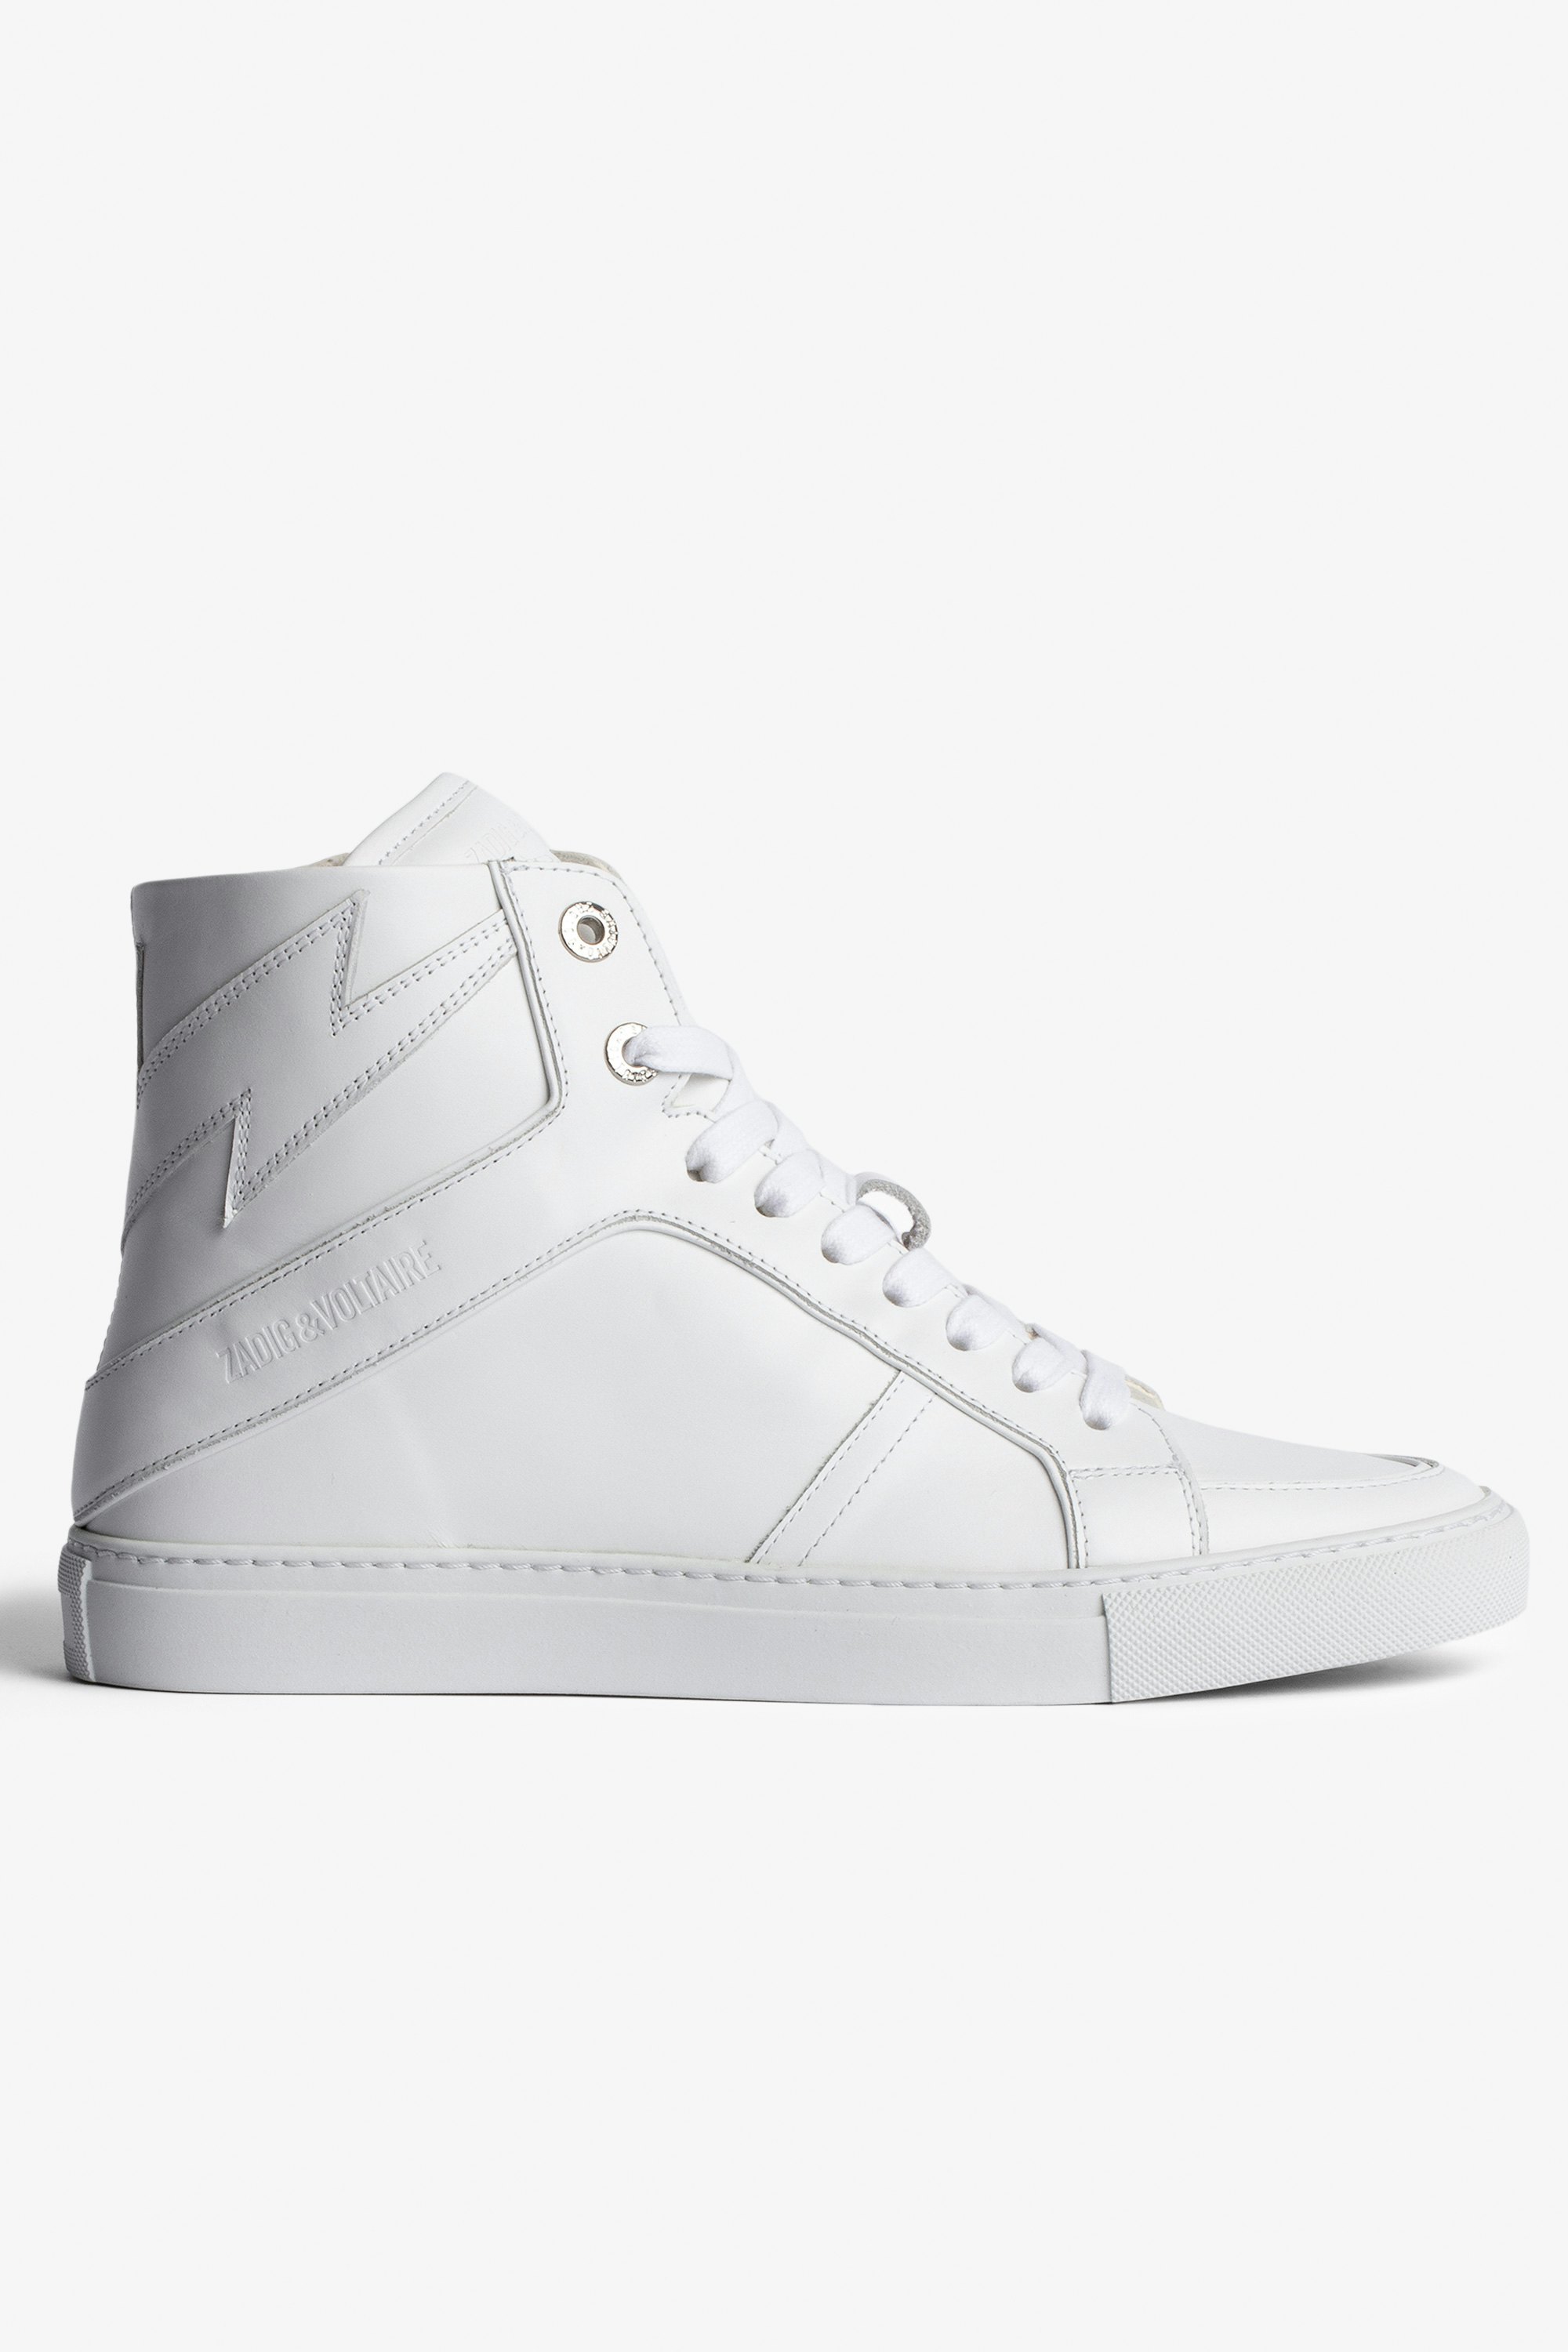 ZV1747 High Flash スニーカー Women’s white leather high-top sneakers.